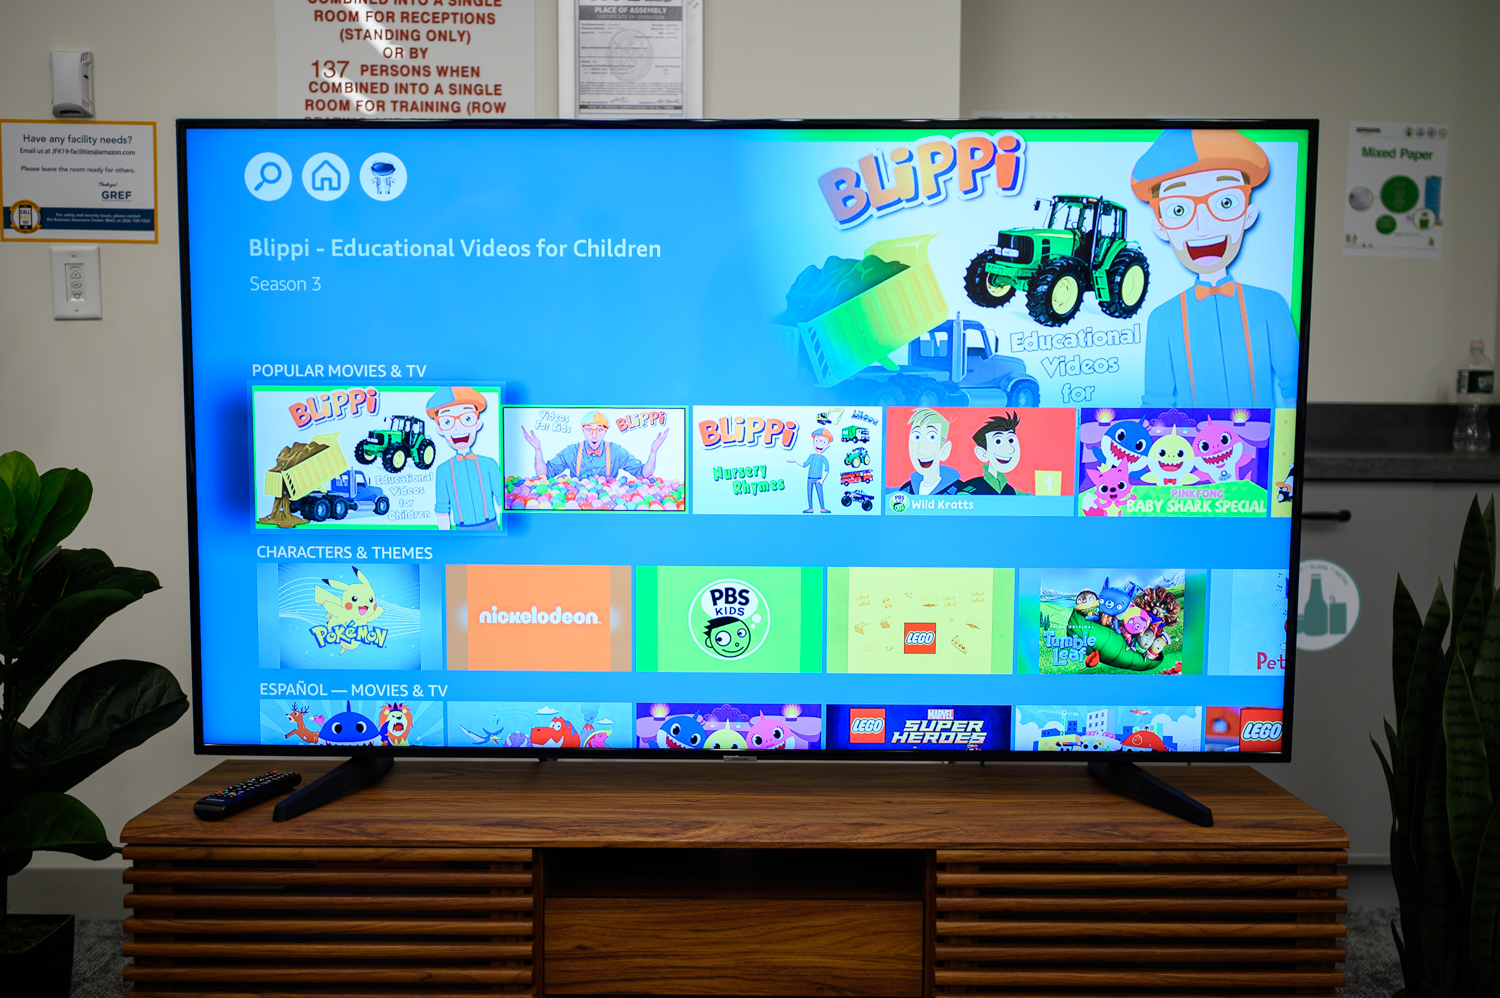 unveils Kindle Kids Edition and brings FreeTime to Fire TV devices